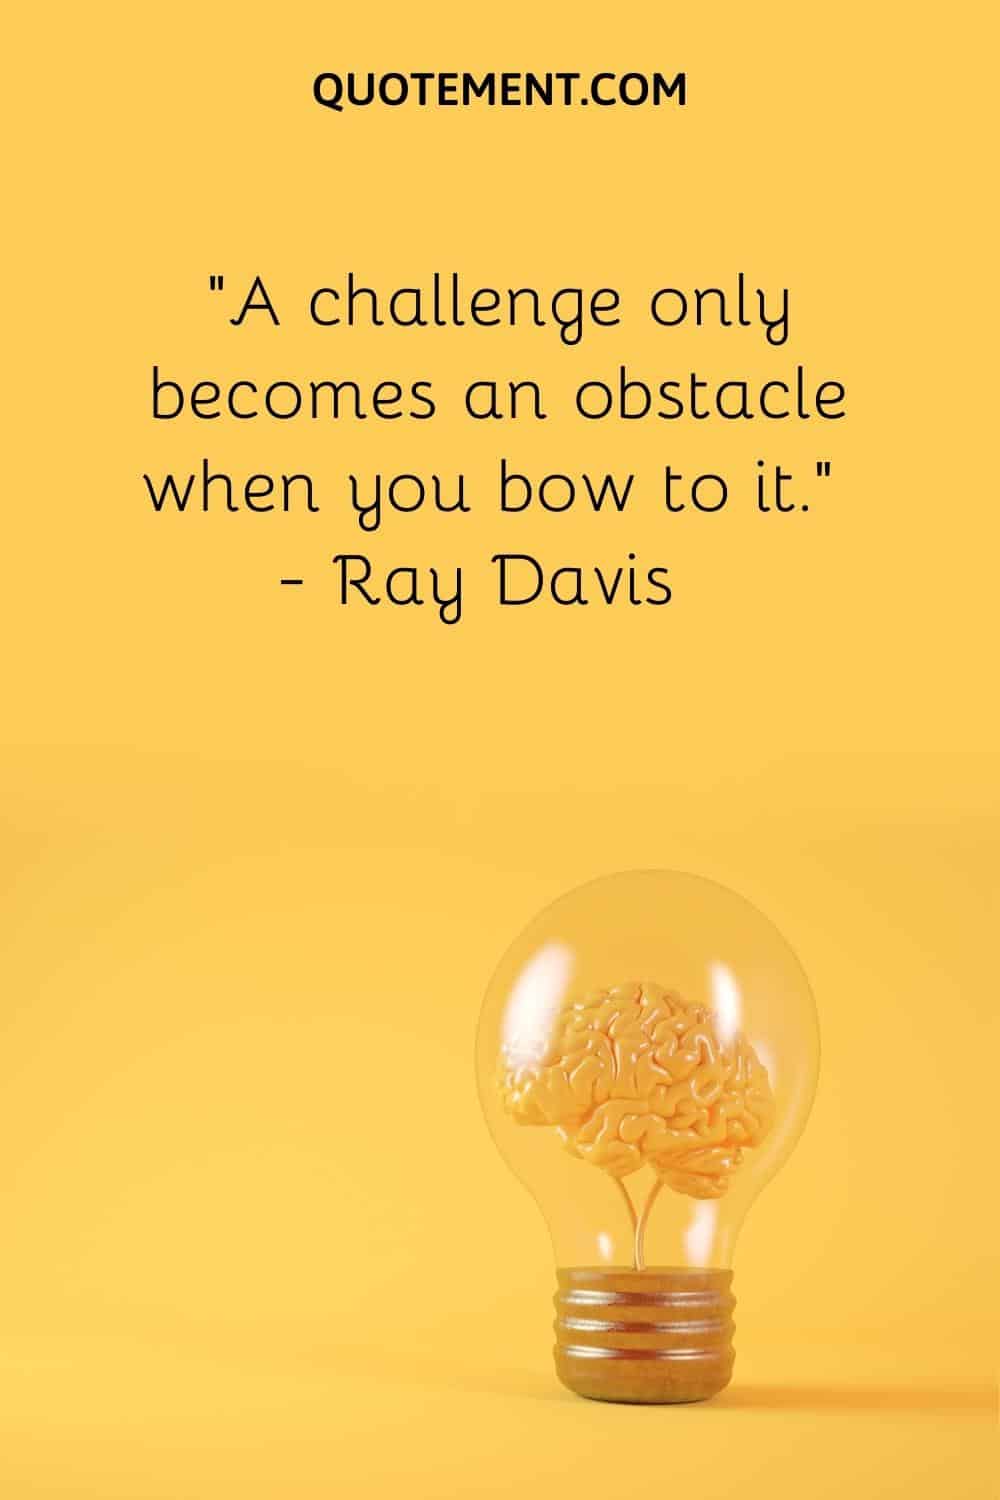 “A challenge only becomes an obstacle when you bow to it.” — Ray Davis